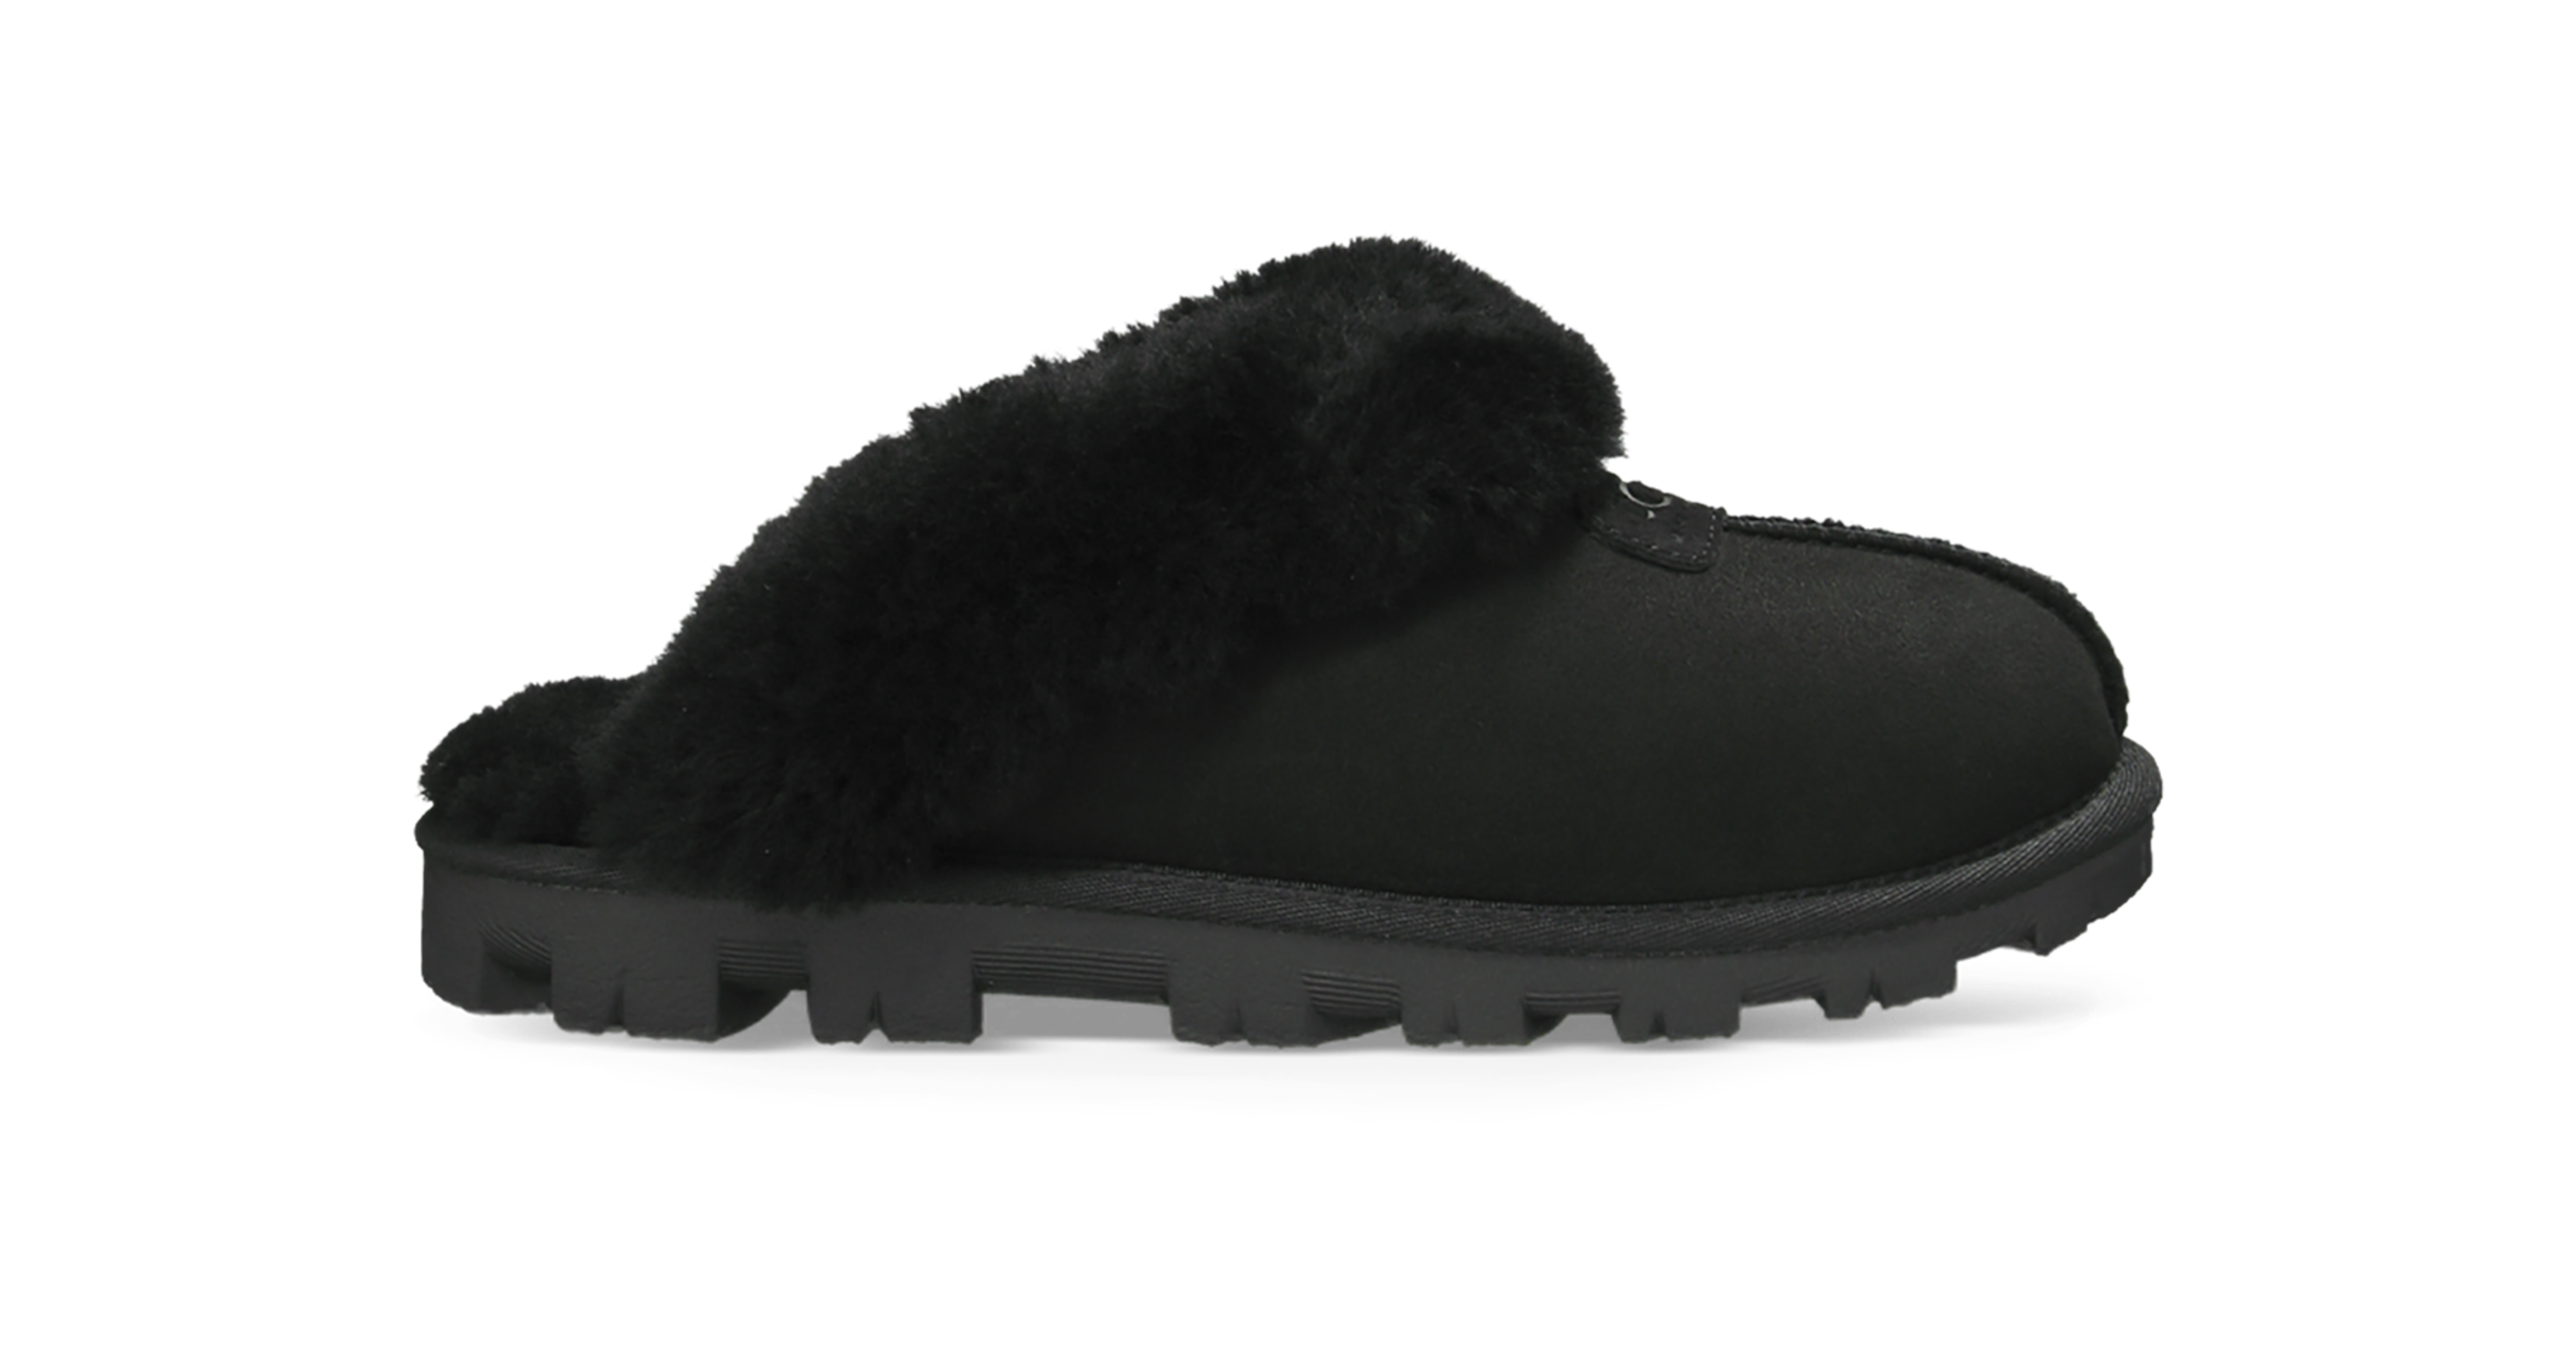 UGG® Coquette for Women  Most Comfortable House Slippers at